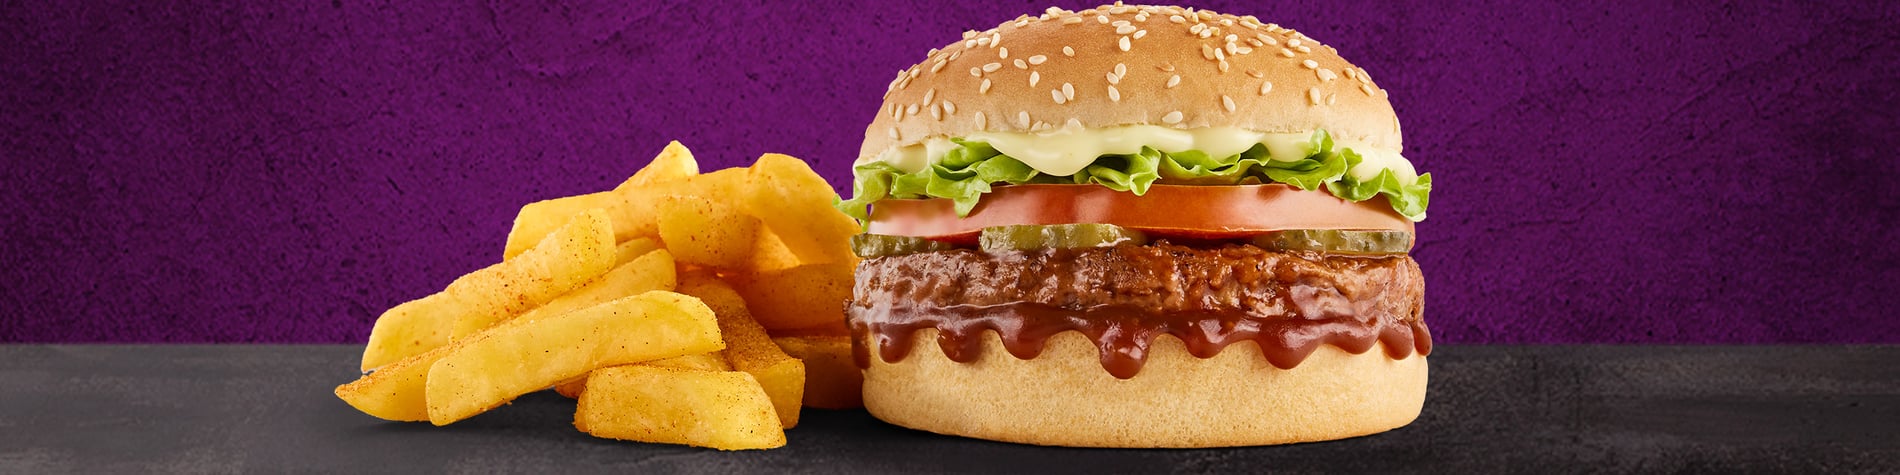 The NEW Mo’MjojoTM Burger Meal from Steers® Total Umzimkulu. 2 Flame-Grilled pure beef patties, pineapple, macon, tomato, lettuce, and small Famous Hand-Cut Chips, on a purple background.